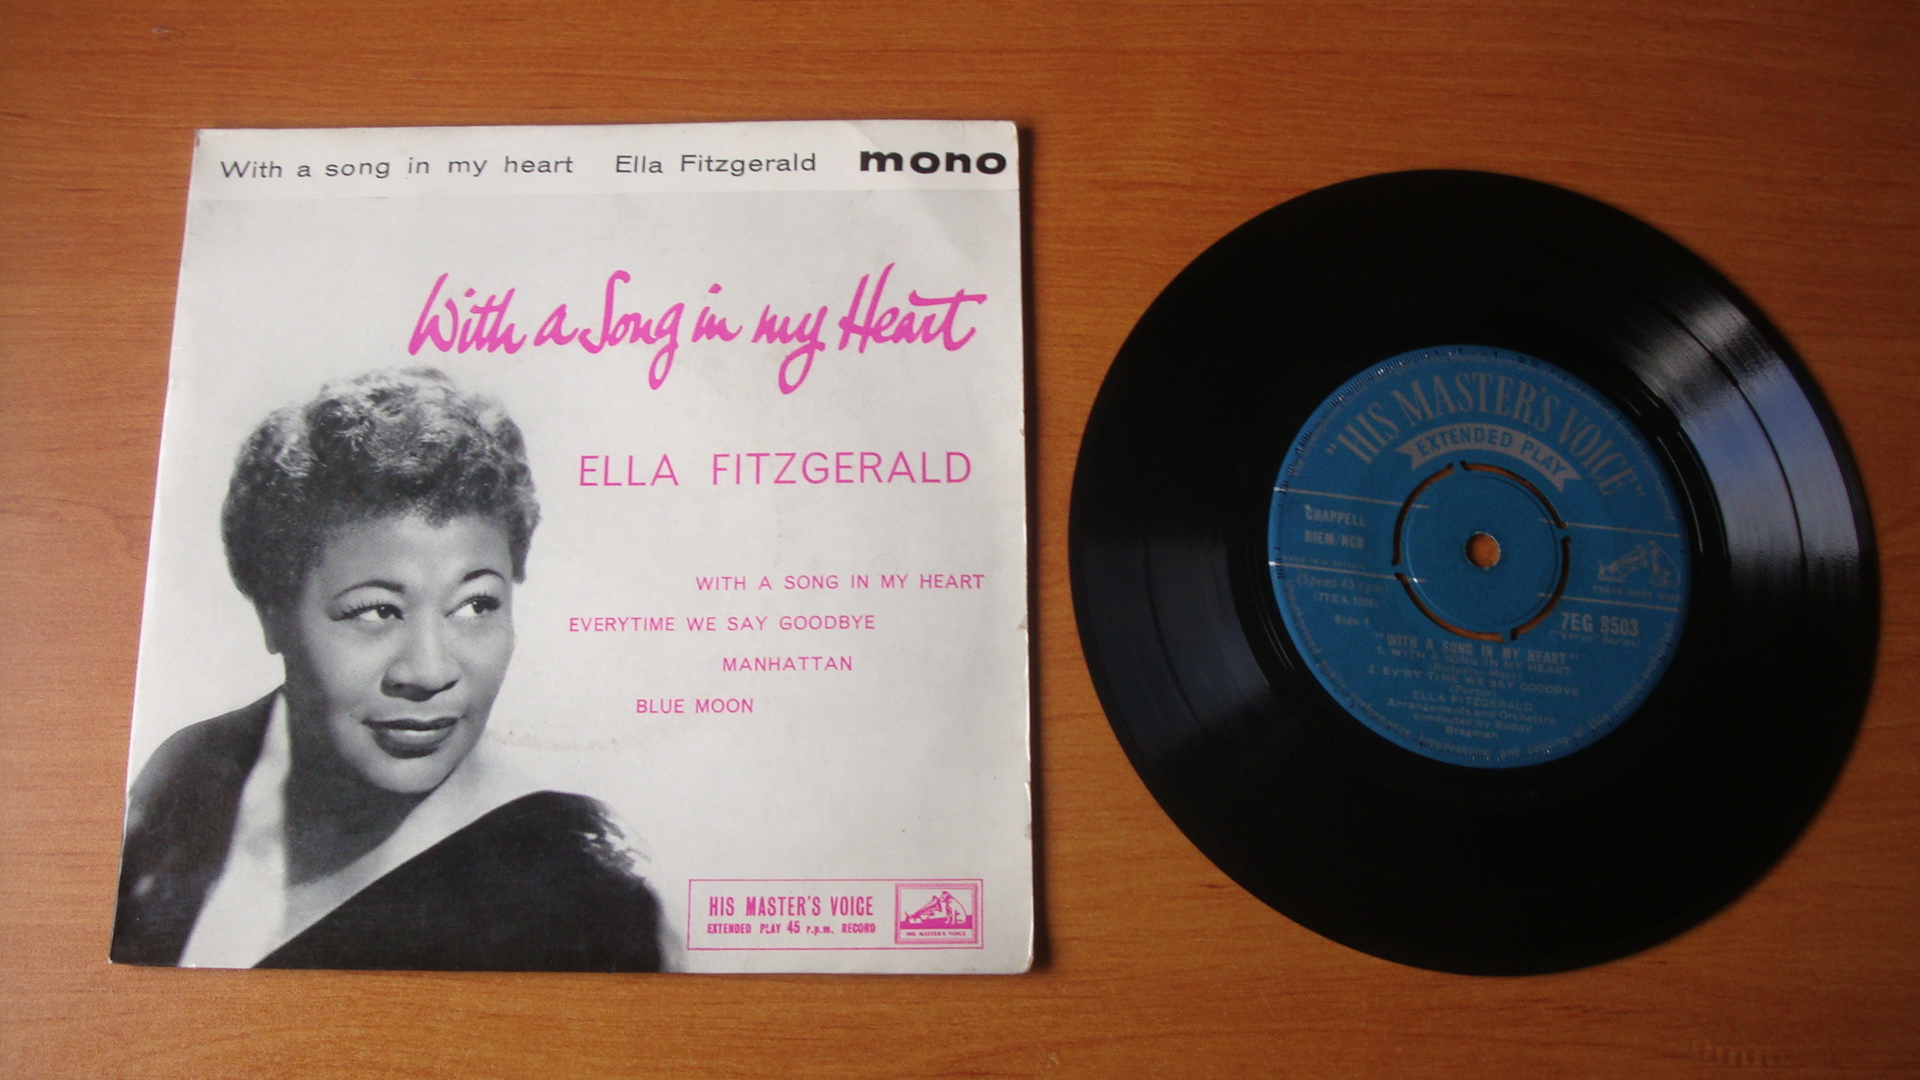 PW-DS-019 - Ella Fitzgerald - With A Song In My Heart (1).JPG  by whitetaylor